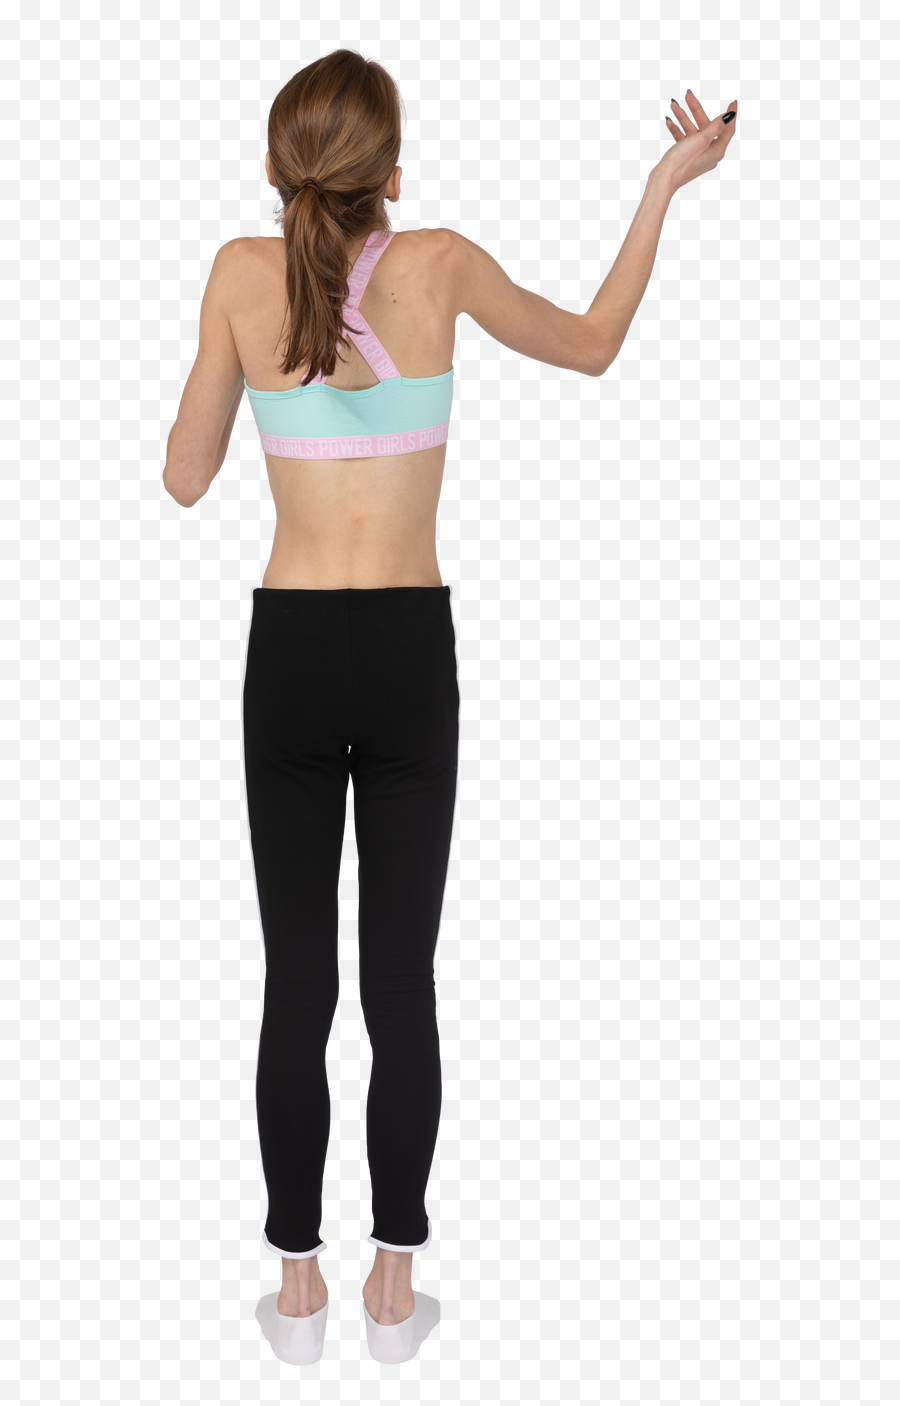 Back View Of A Teen Girl In Sportswear Balancing On Her Leg Emoji,Sports And Fitness Emojis